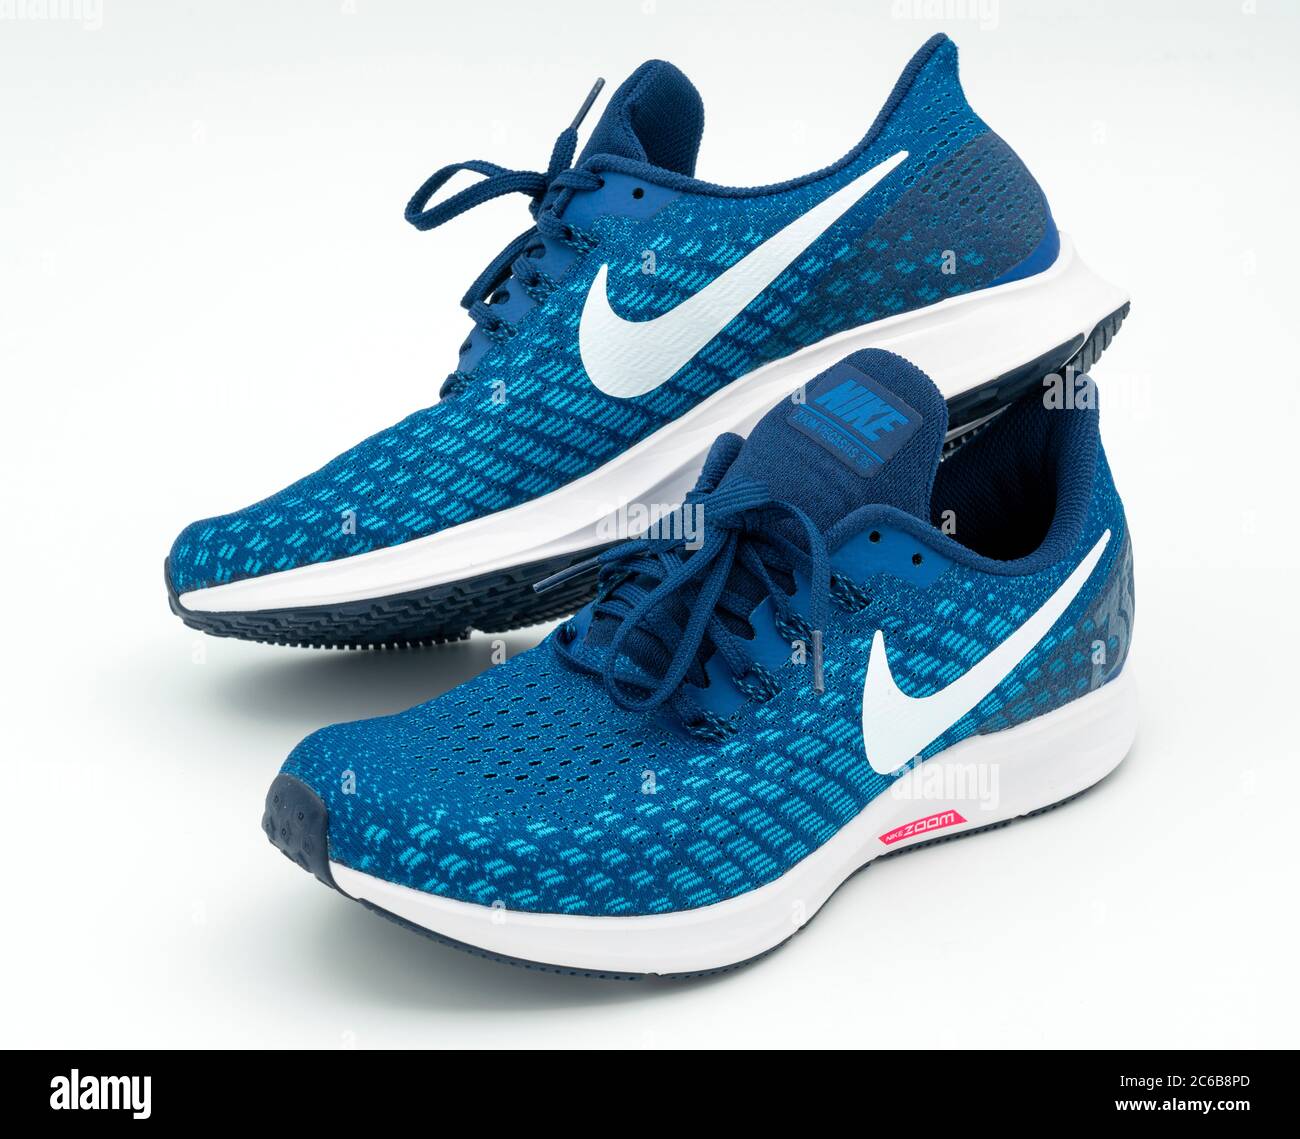 Pair of blue and white Nike Pegasus 35 running shoes Stock Photo - Alamy